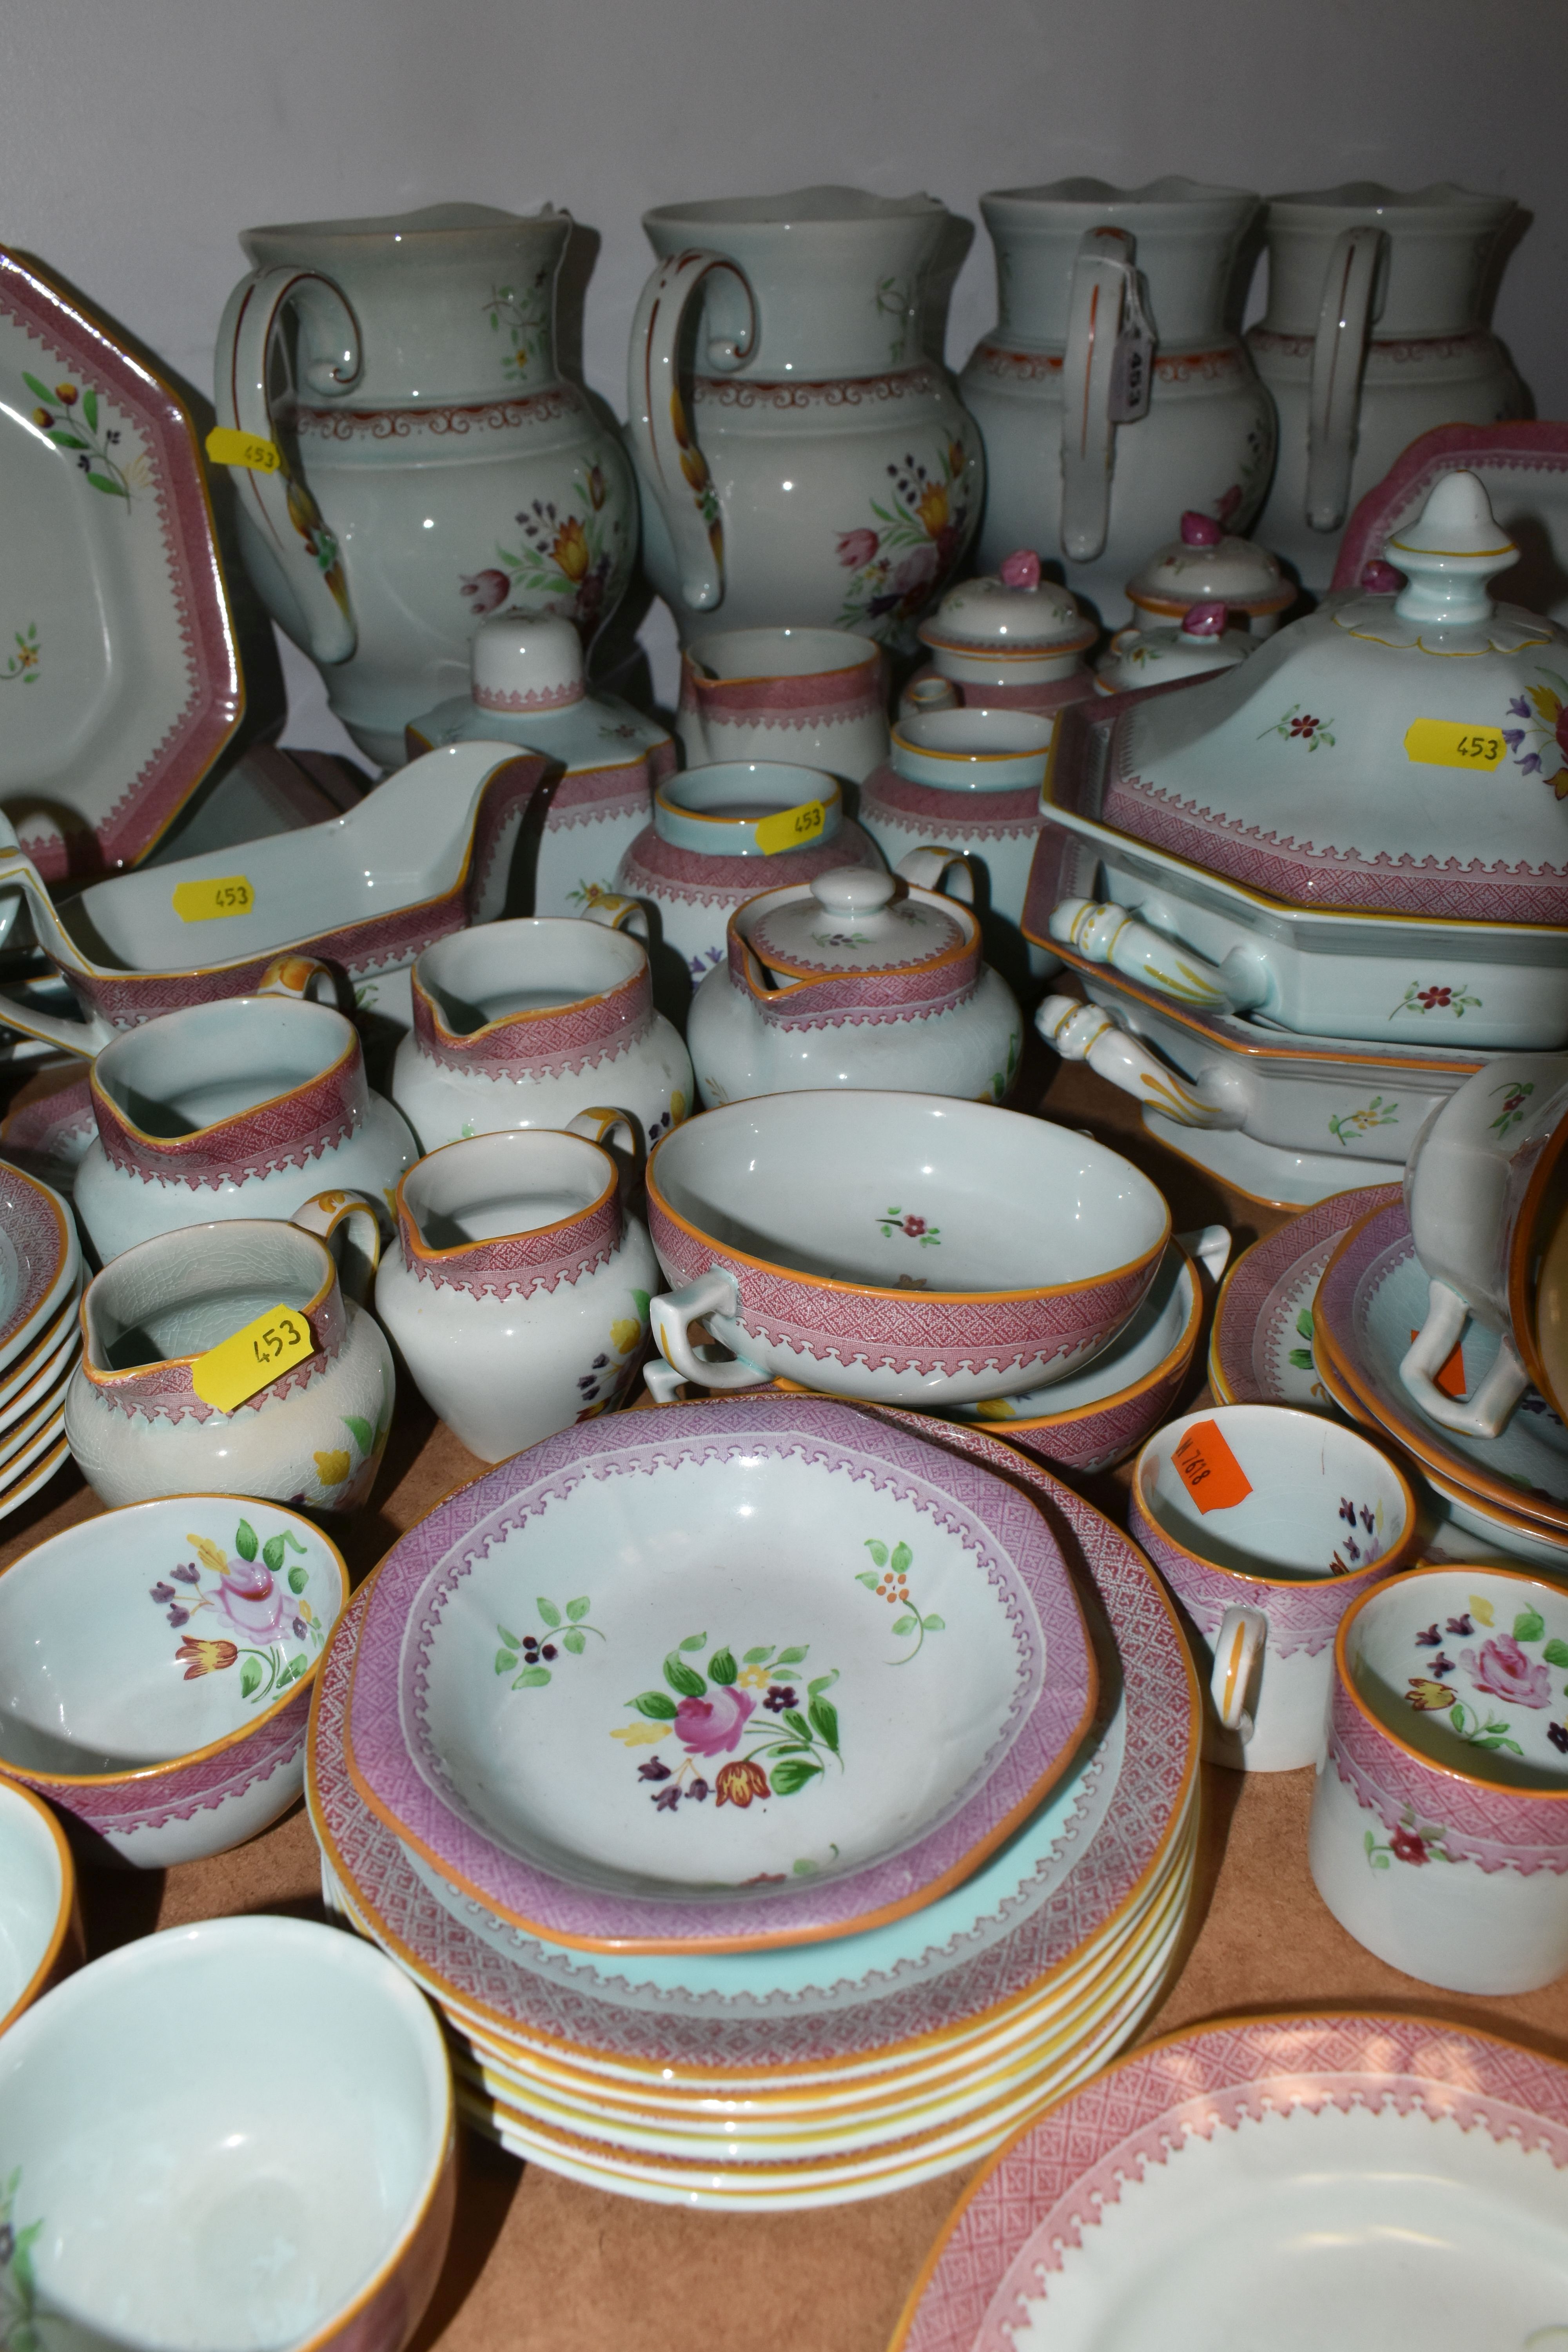 A LARGE ADAMS TEA AND DINNER SET IN HAND-PAINTED 'CALYX WARE' PATTERN to include coffee cups, - Image 5 of 6